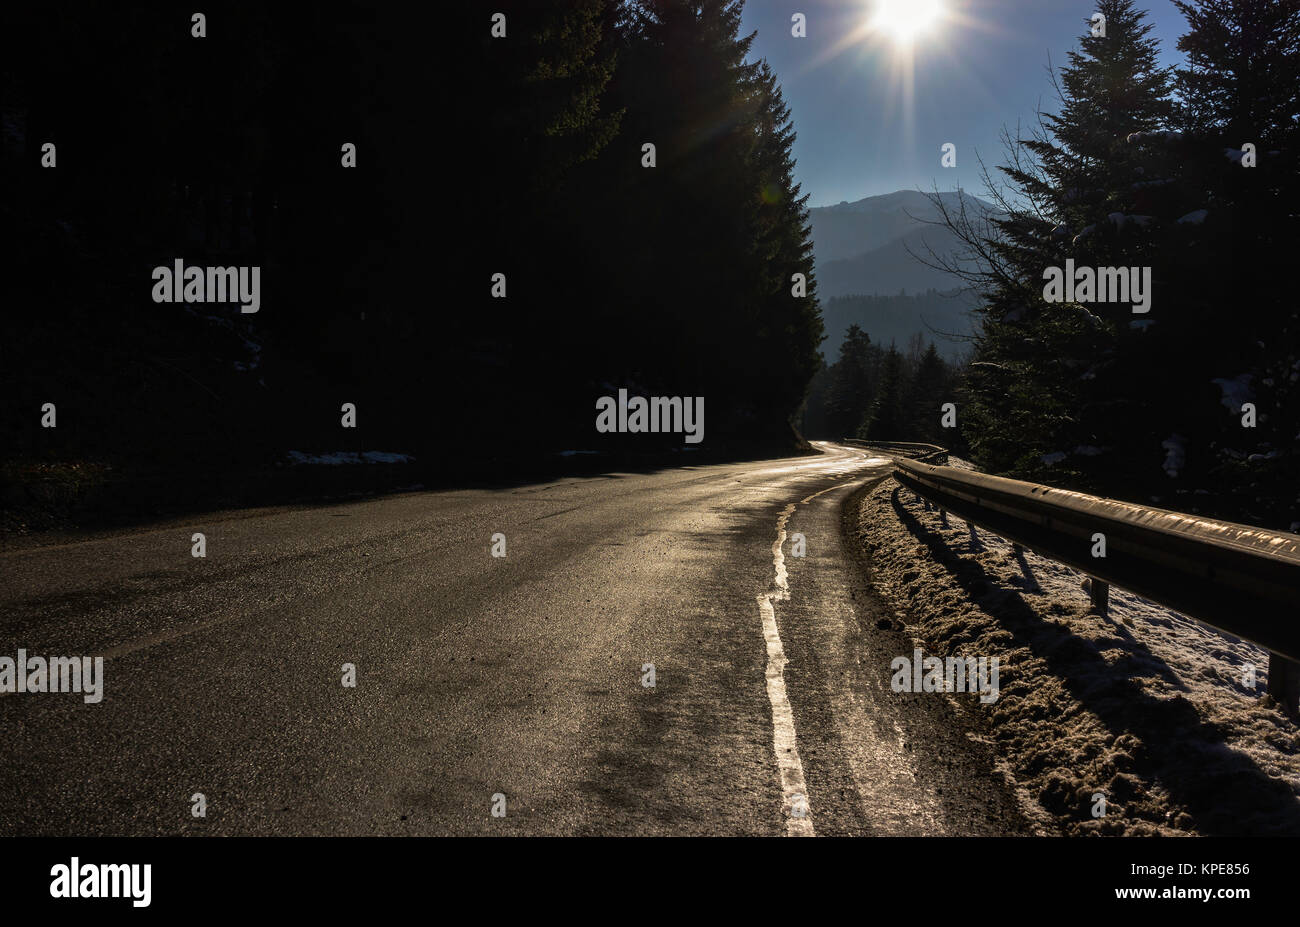 A shiny road curve in the Vosges mountains in winter with sunshine, France. Stock Photo